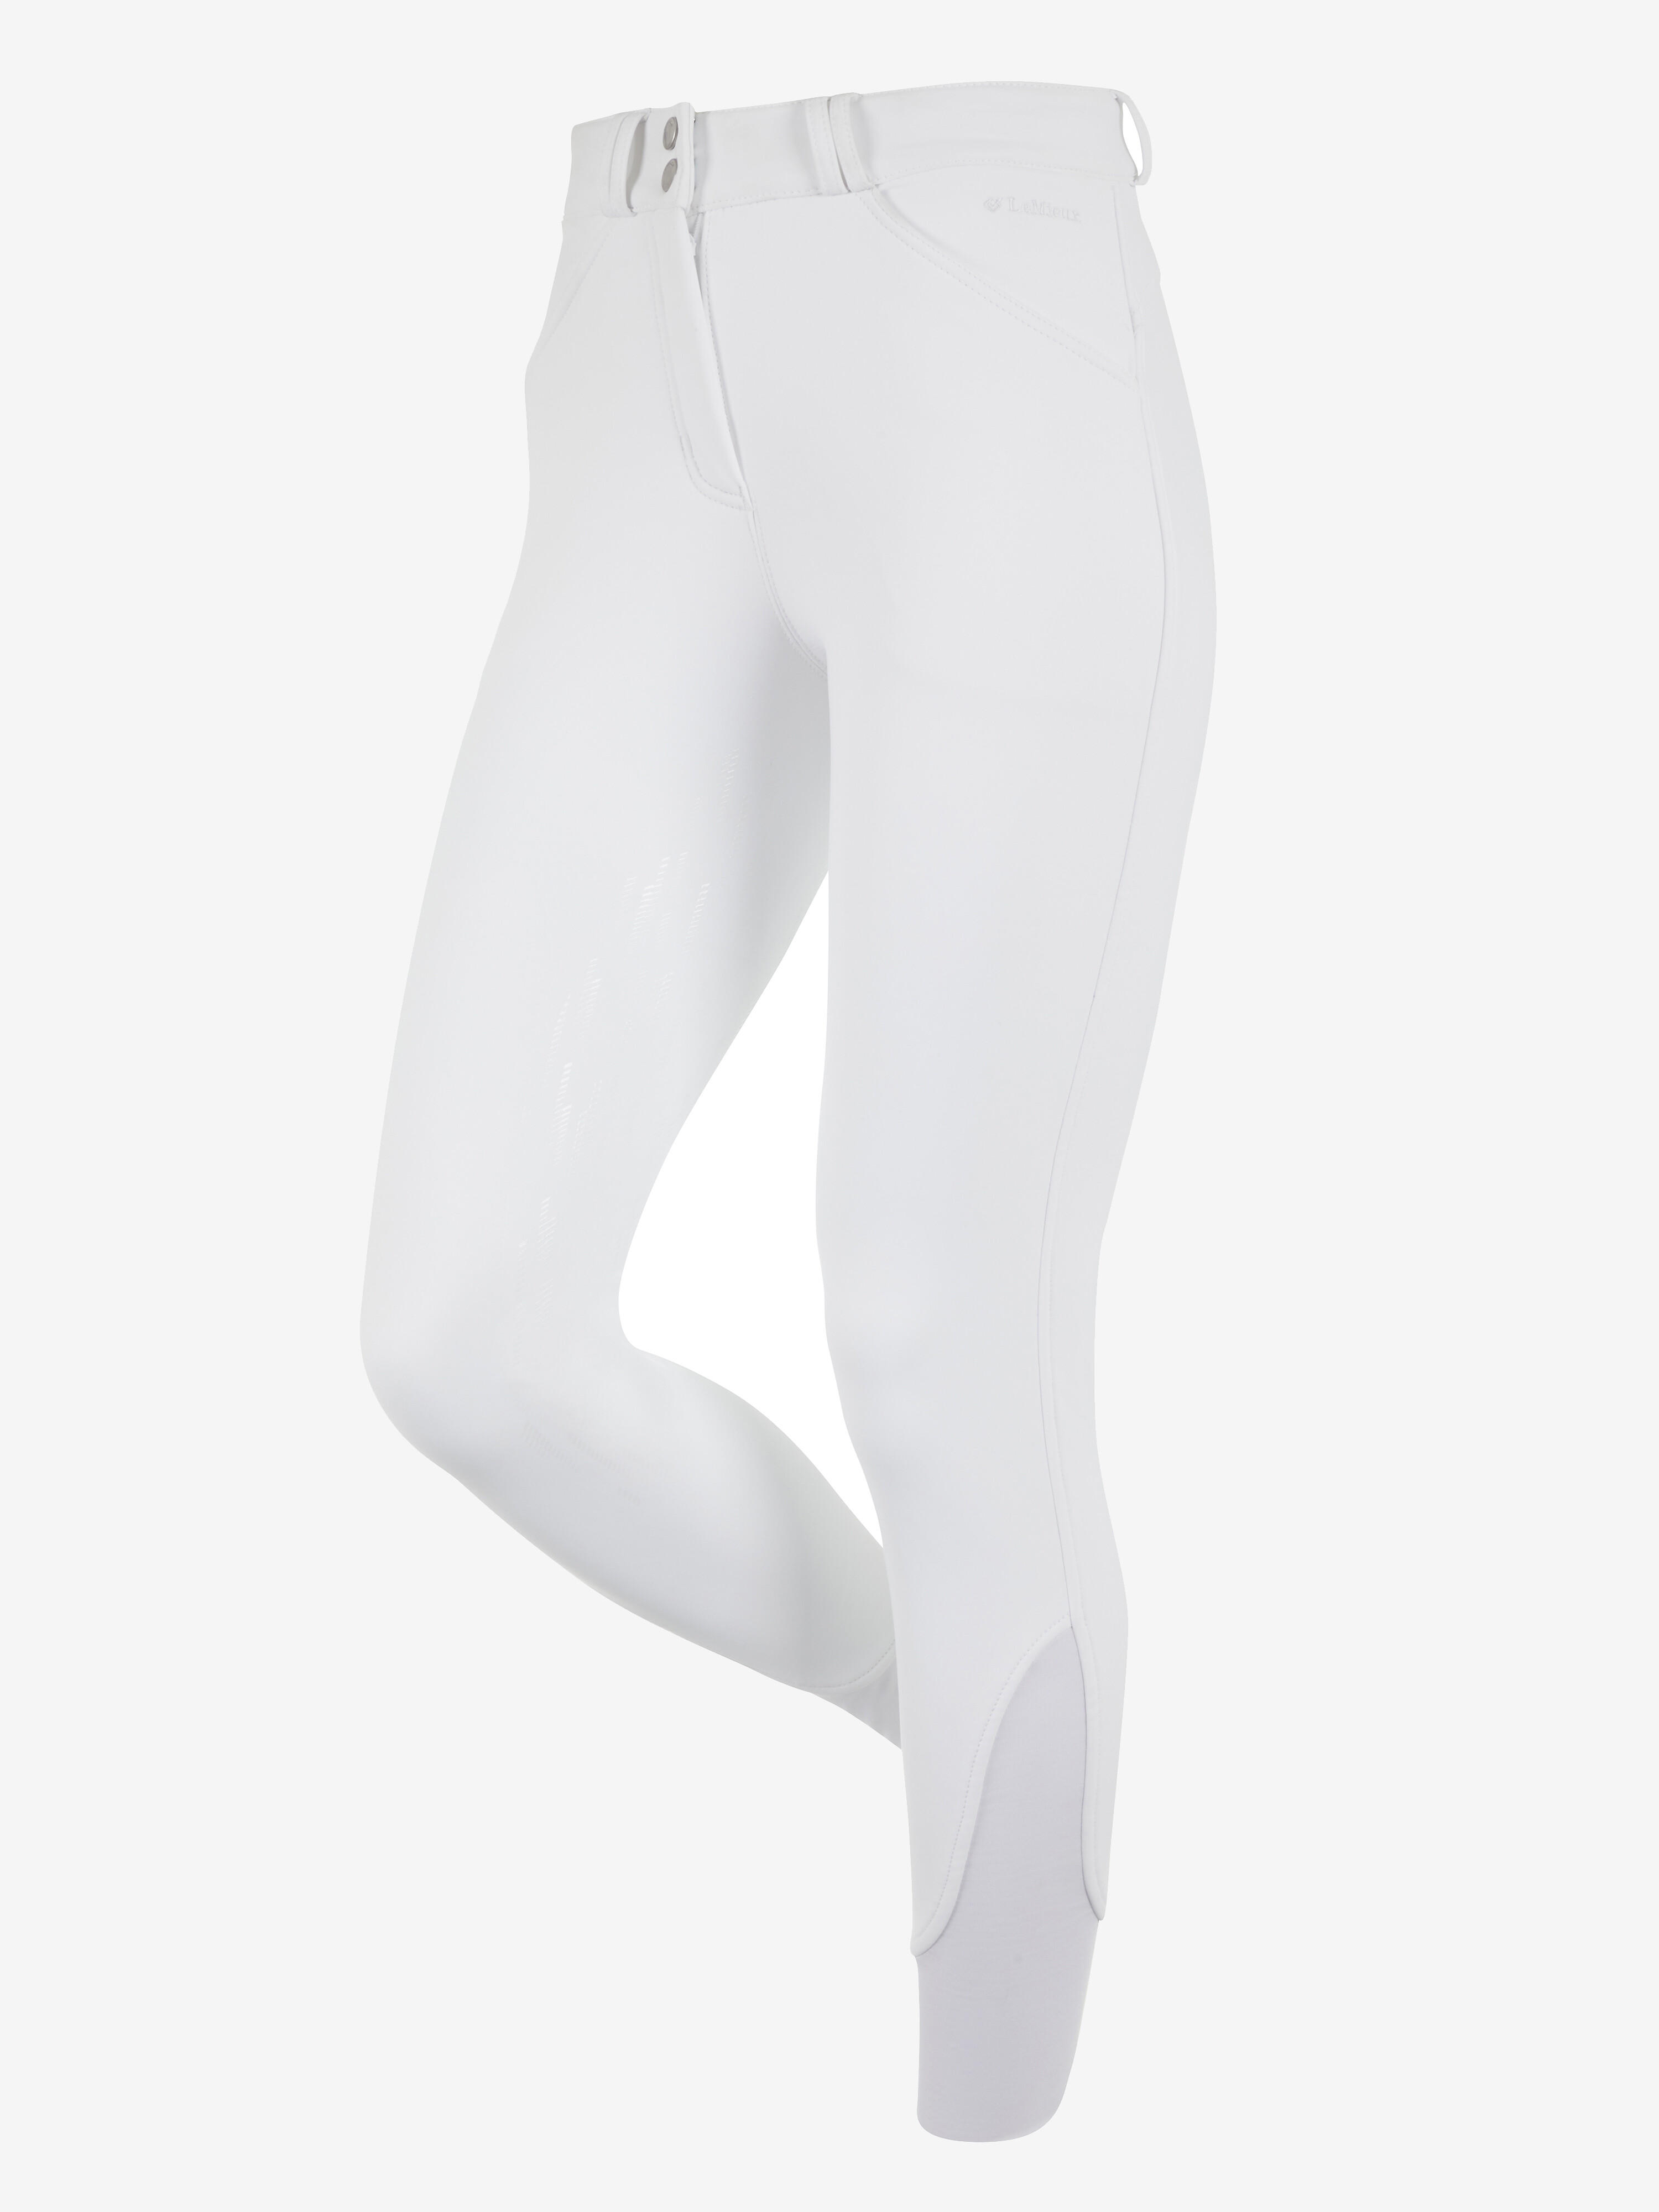 Drytex Waterproof Breeches Full Seat White Competition Essentials